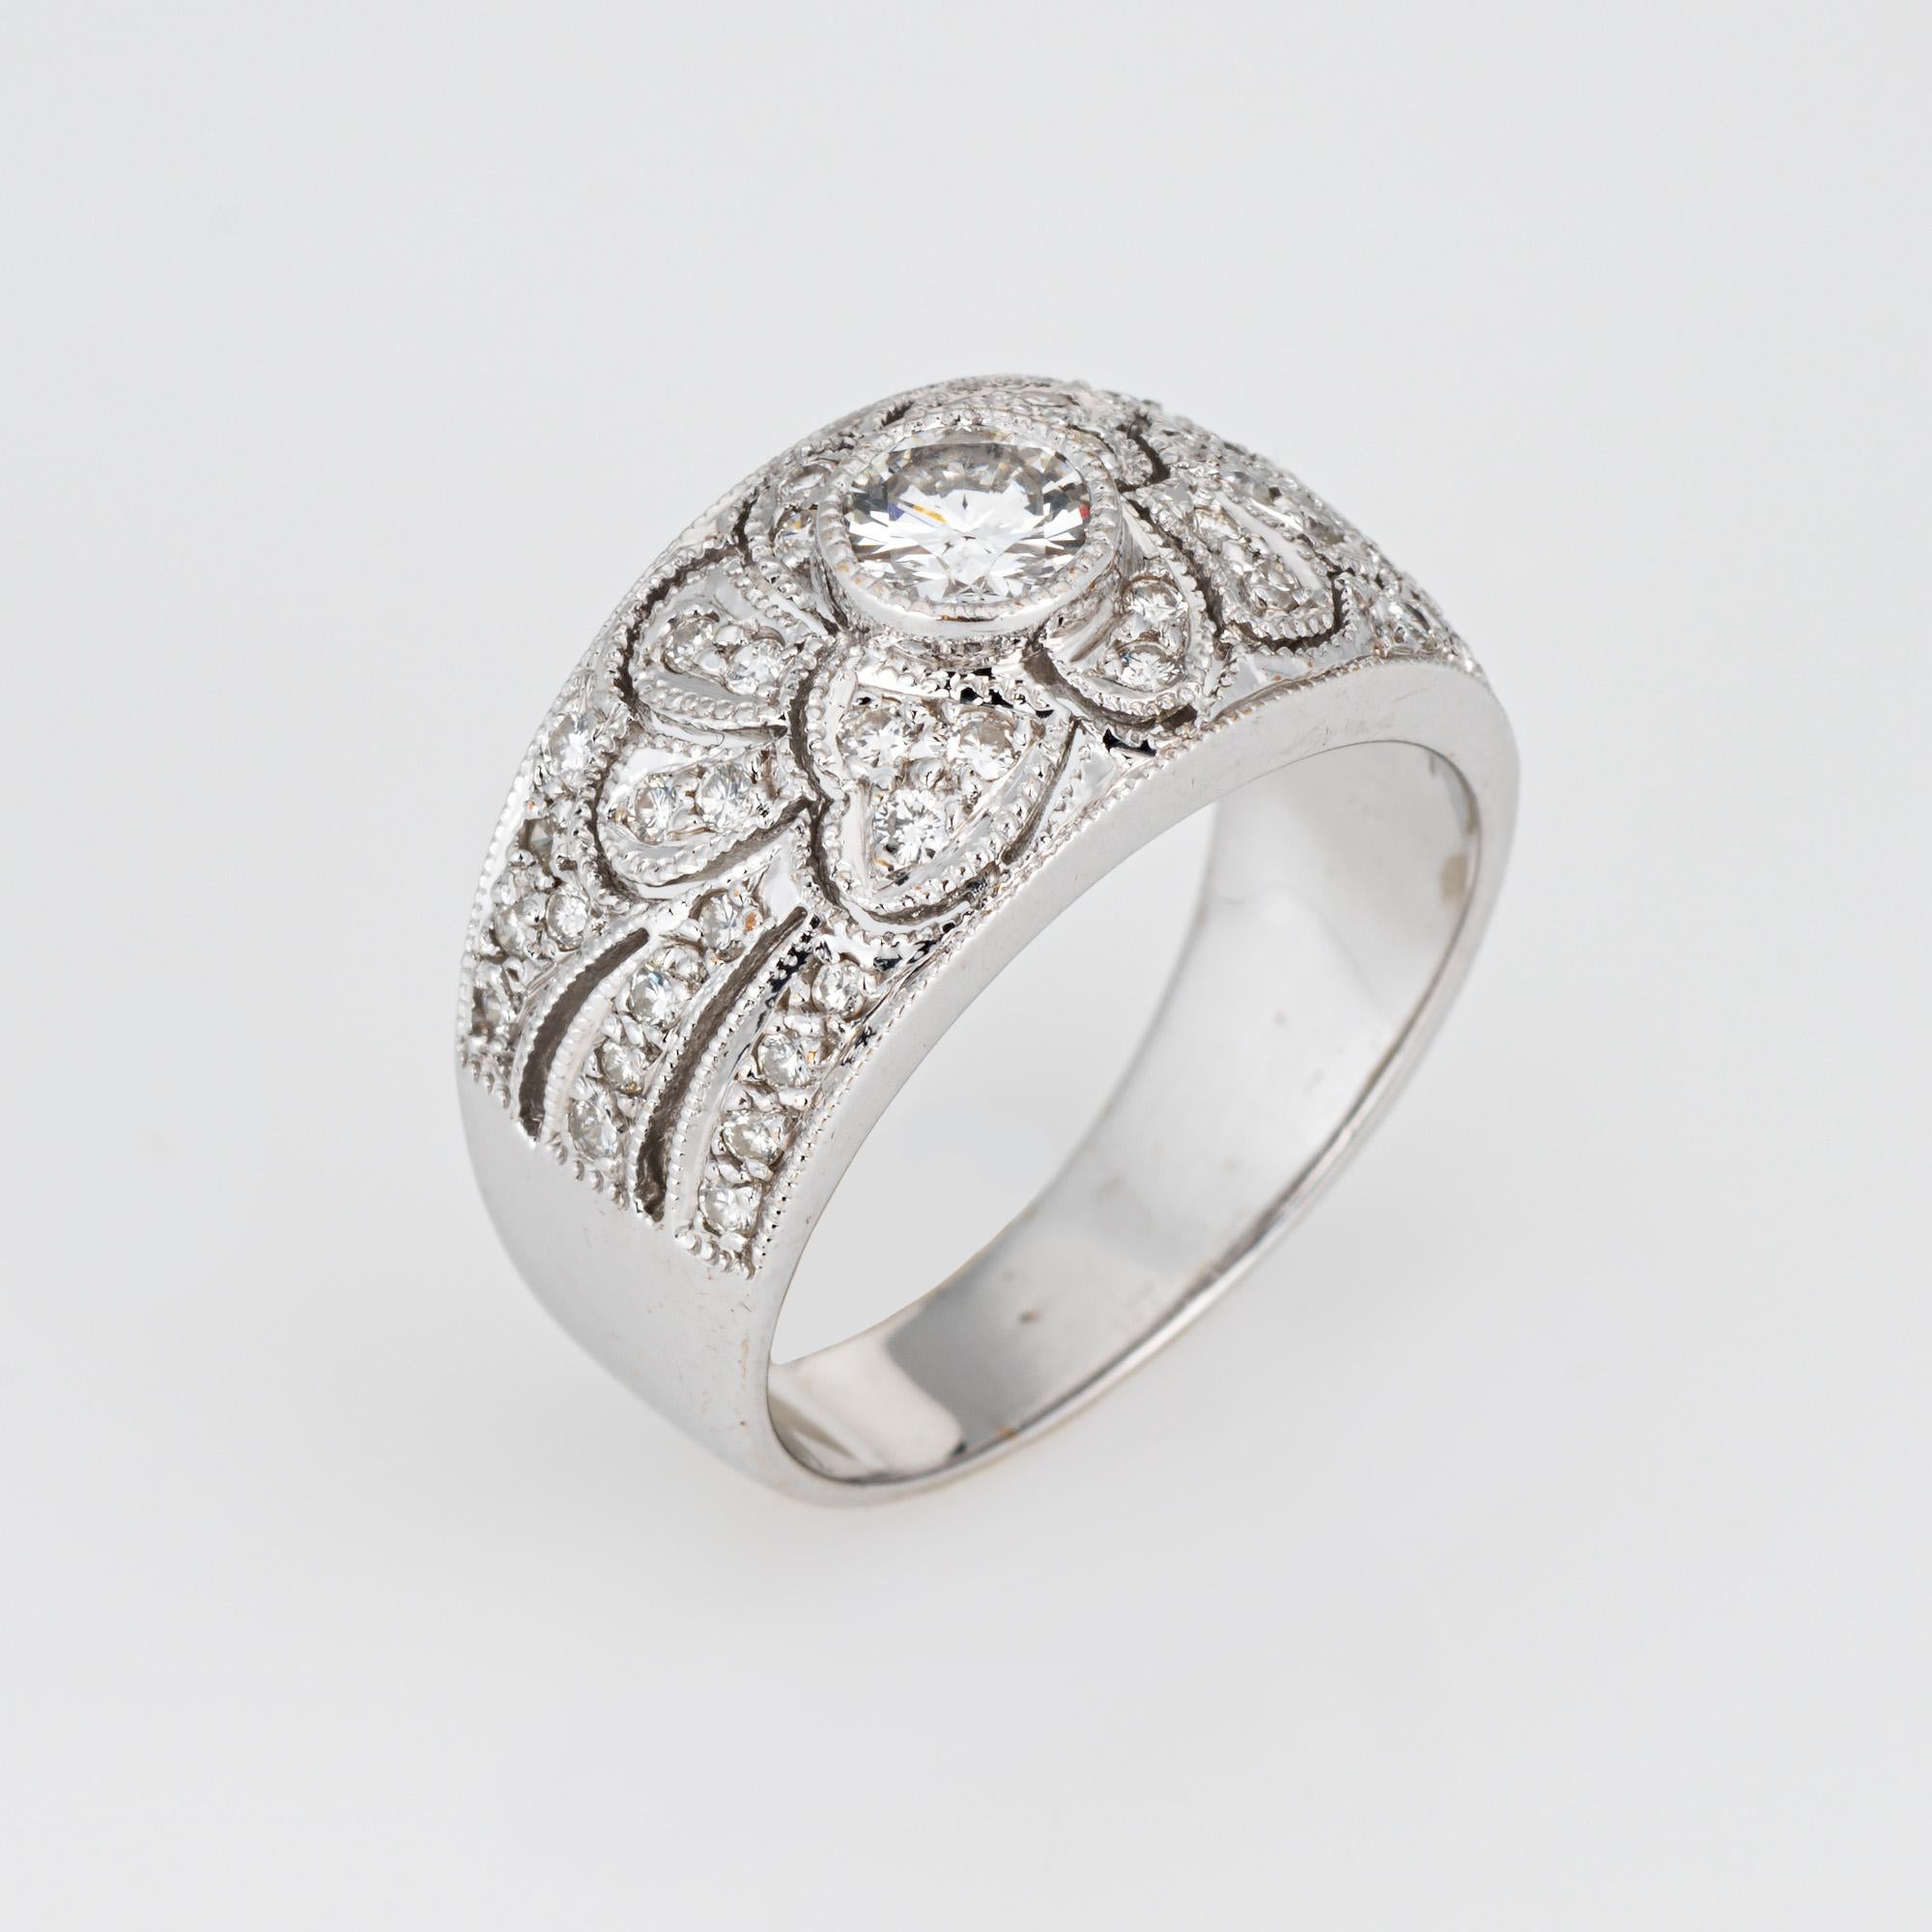 Stylish estate diamond half band crafted in 18 karat white gold. 

Diamonds total an estimated 0.50 carats (estimated at H-I color and SI1-I1 clarity). 

Set with shimmering diamonds in a scrolled pattern, the ring makes a statement! The wide band